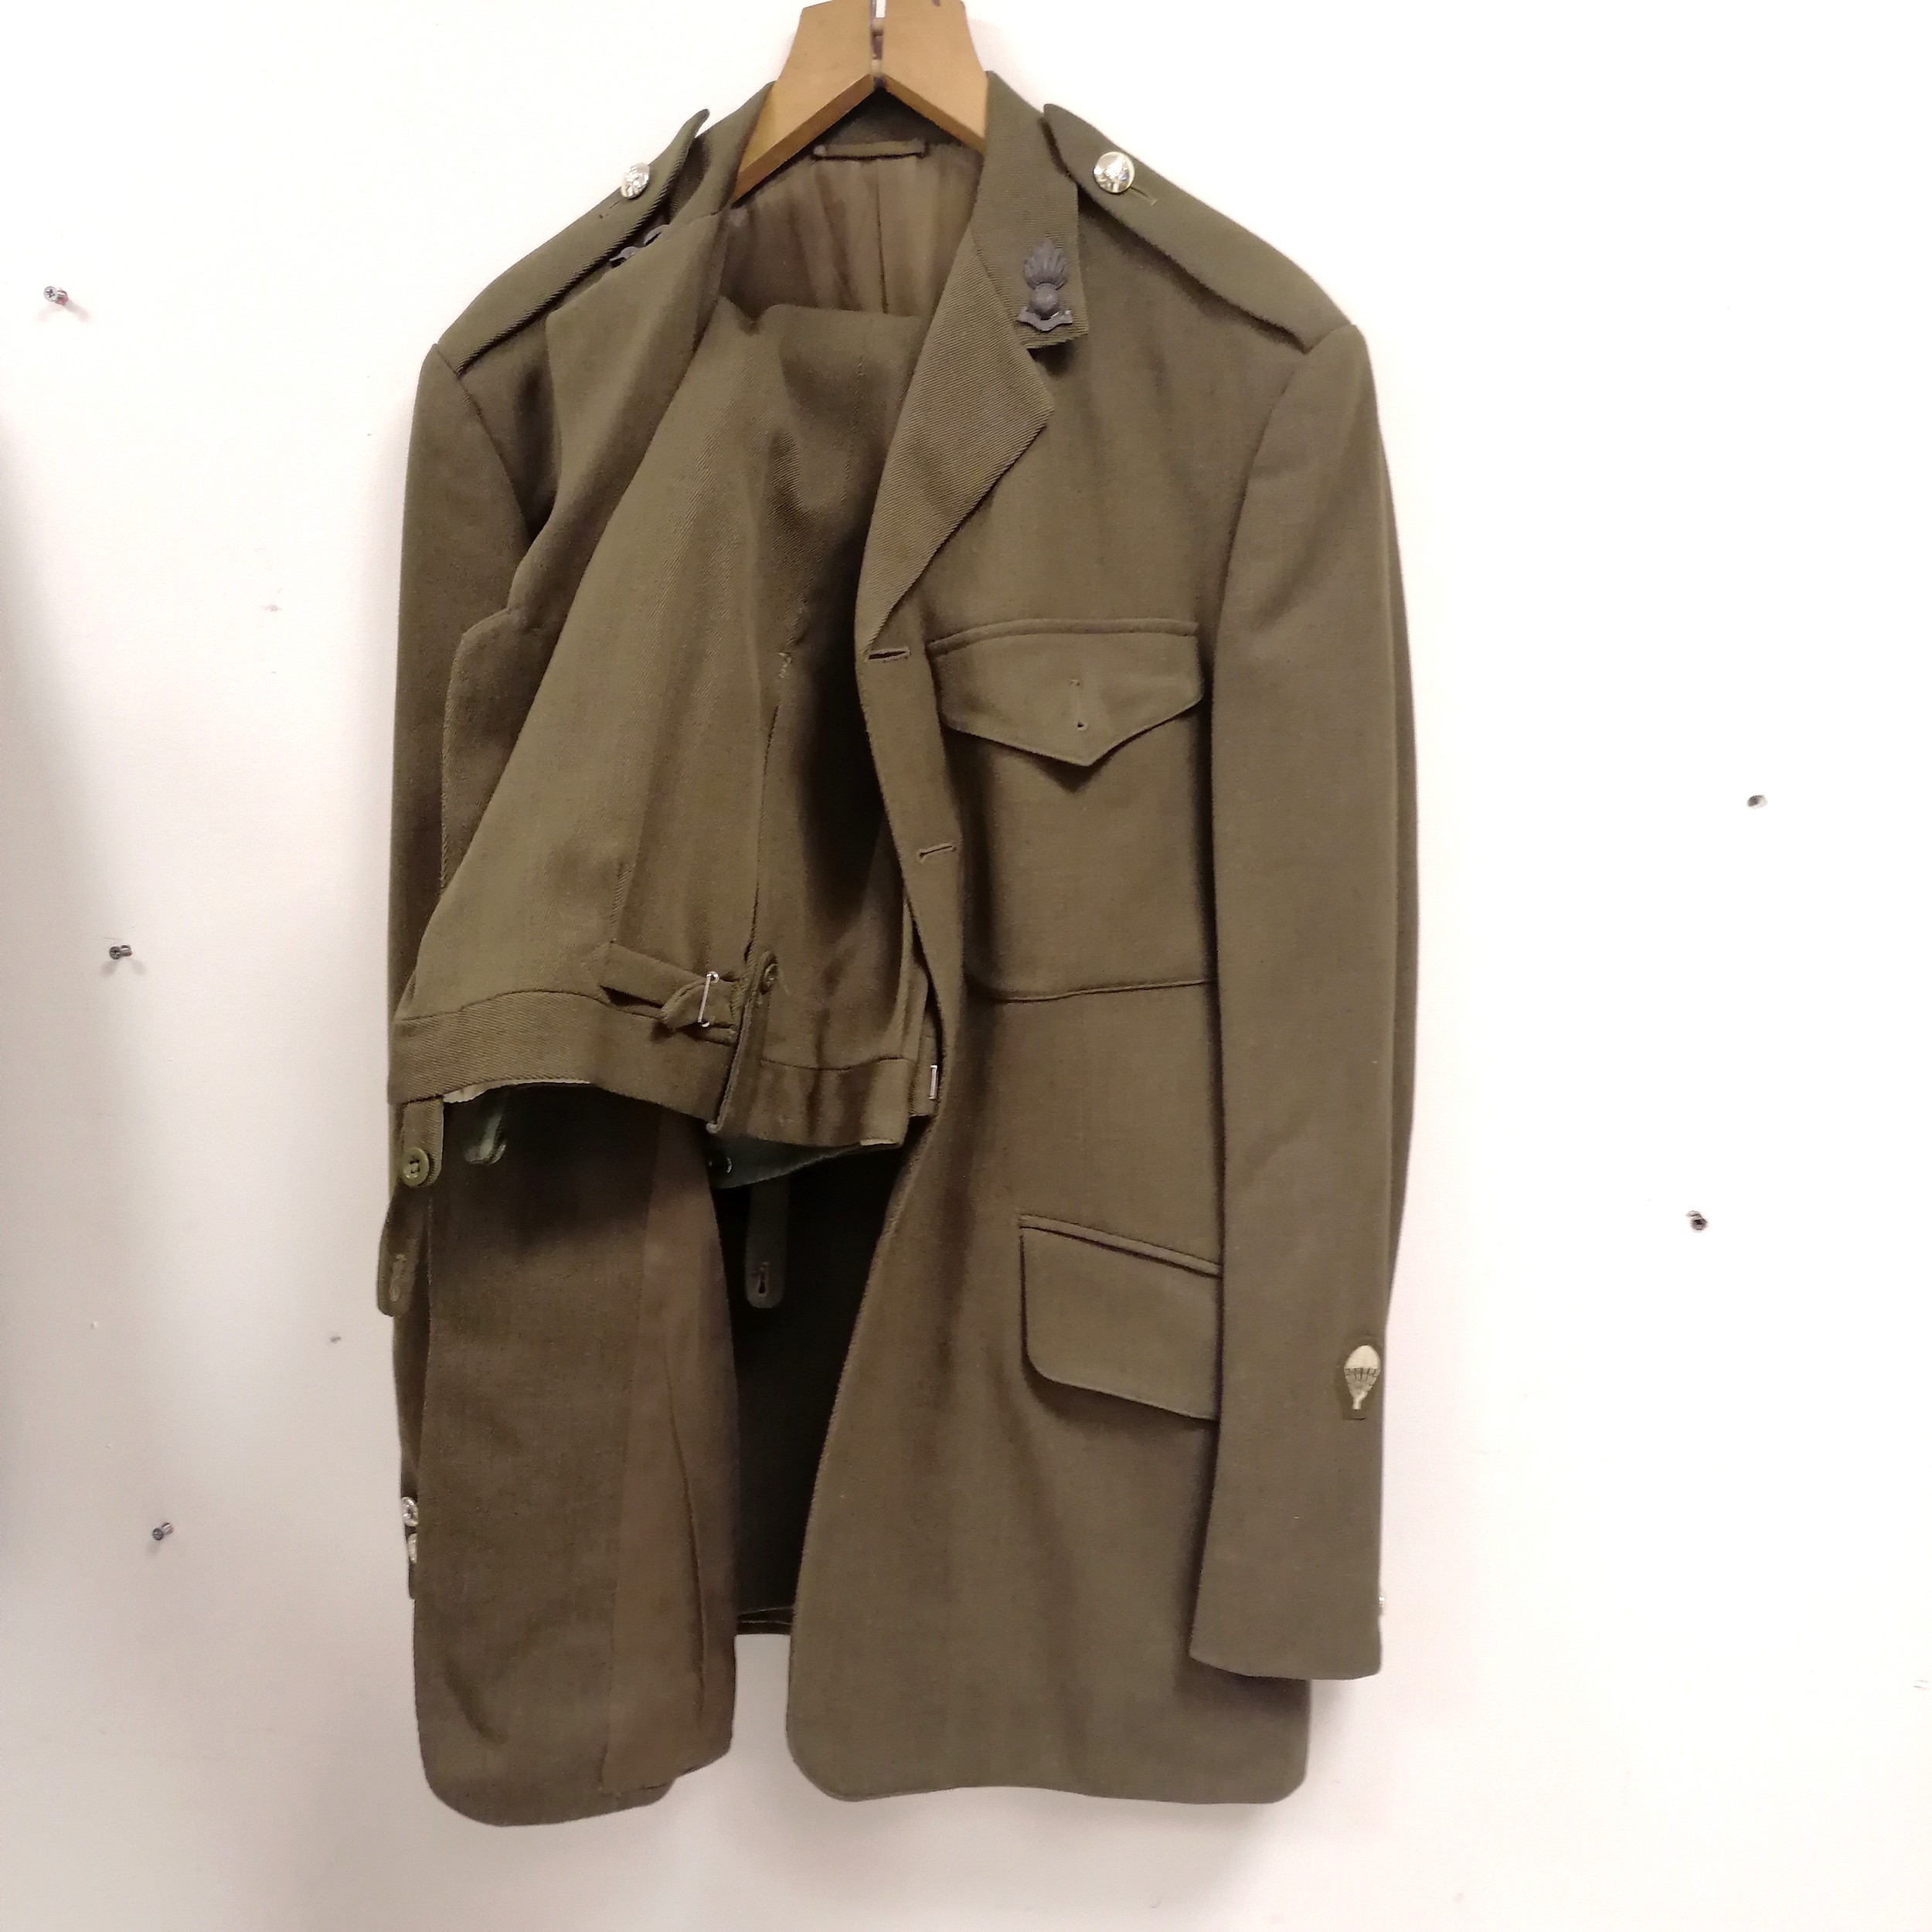 3 Royal Artillery Officers tunics, 2 sets with trousers C 1966-70 96cm chest approx. 1 jacket has - Image 5 of 9